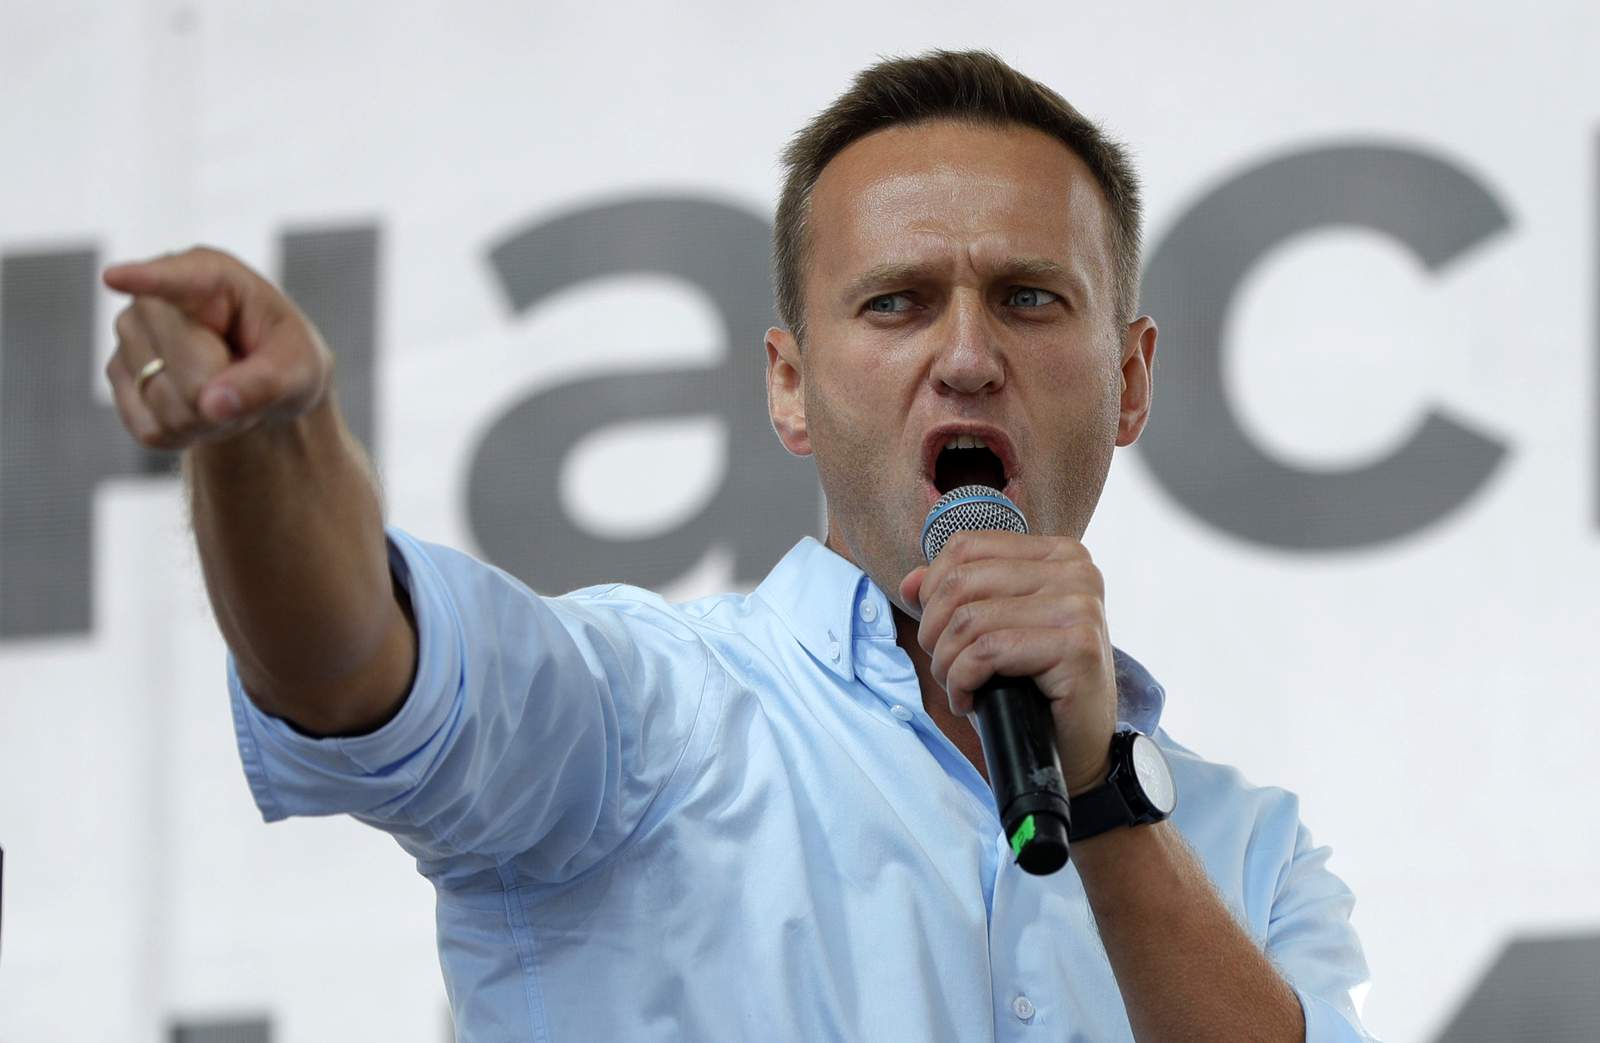 Germany approves Russian request to assist in Navalny probe